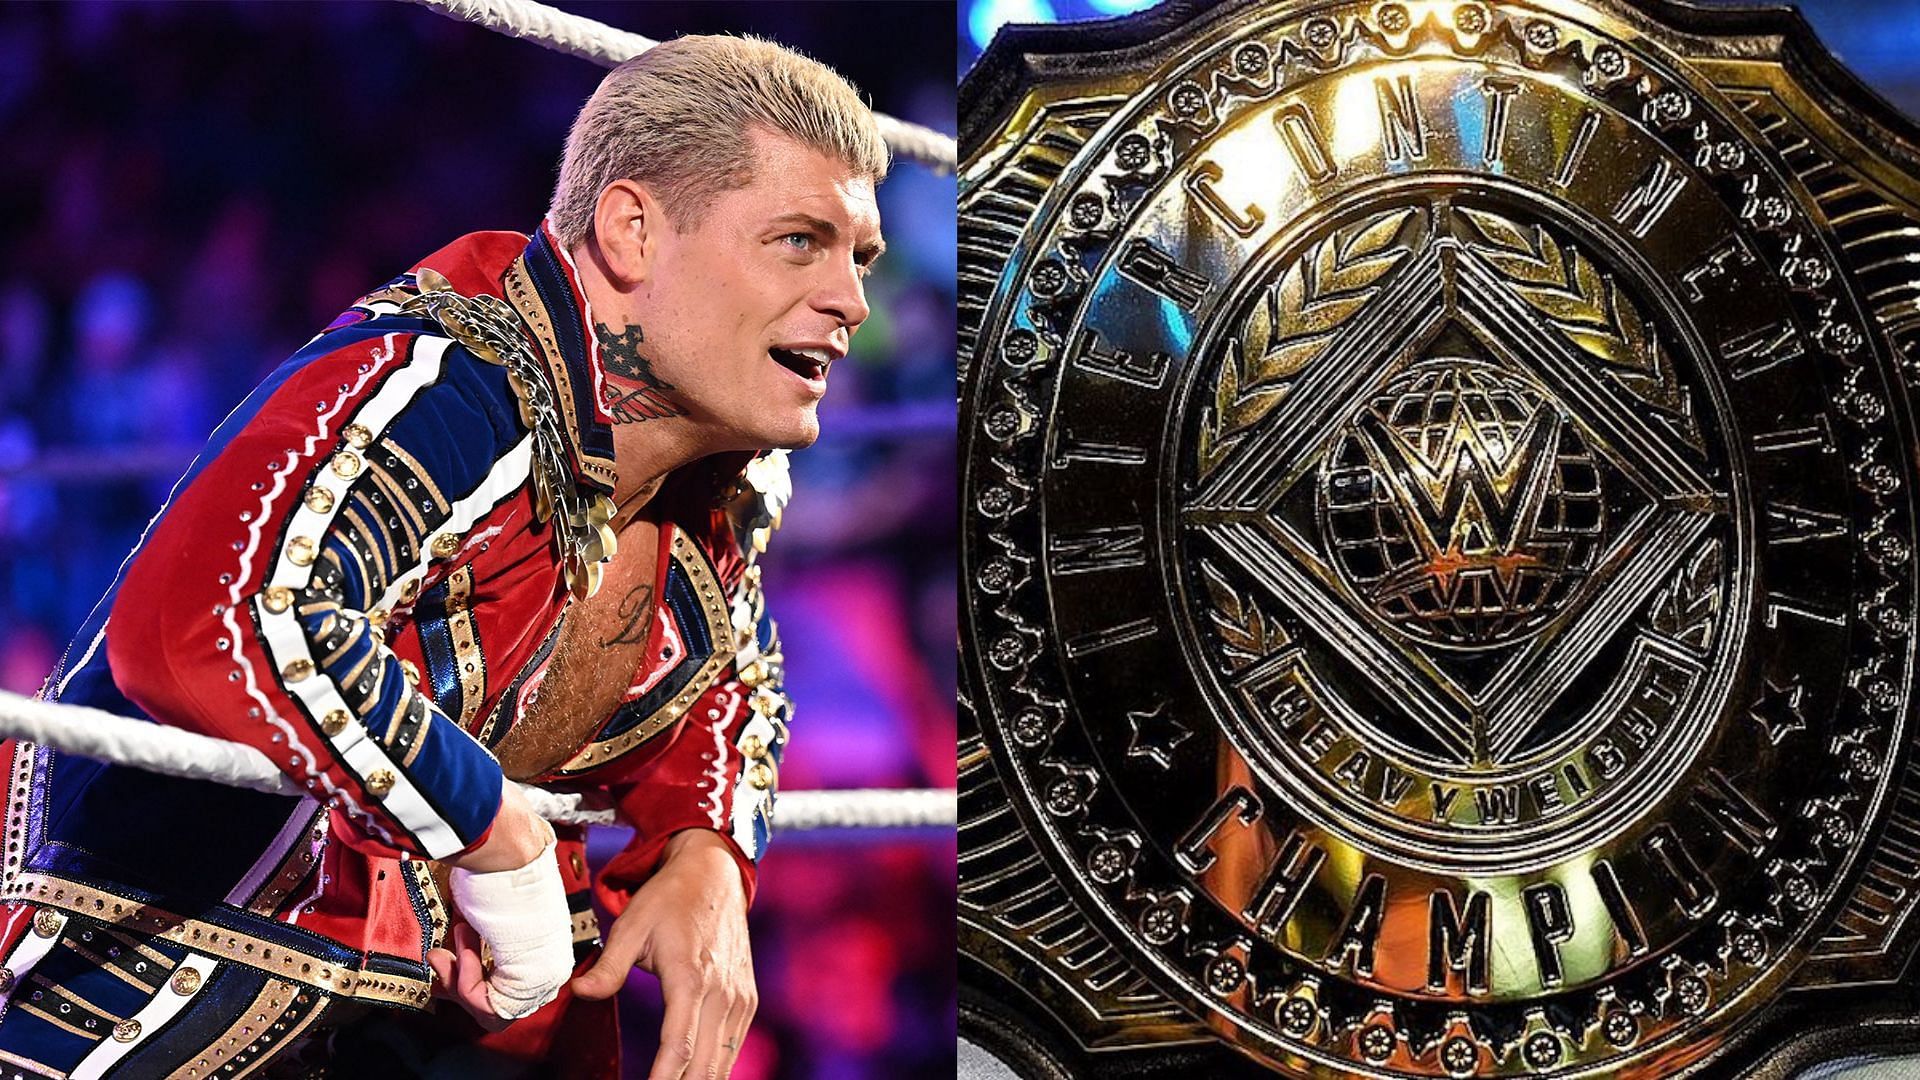 Has Cody Rhodes teased bringing back 3-time Intercontinental Champion ...